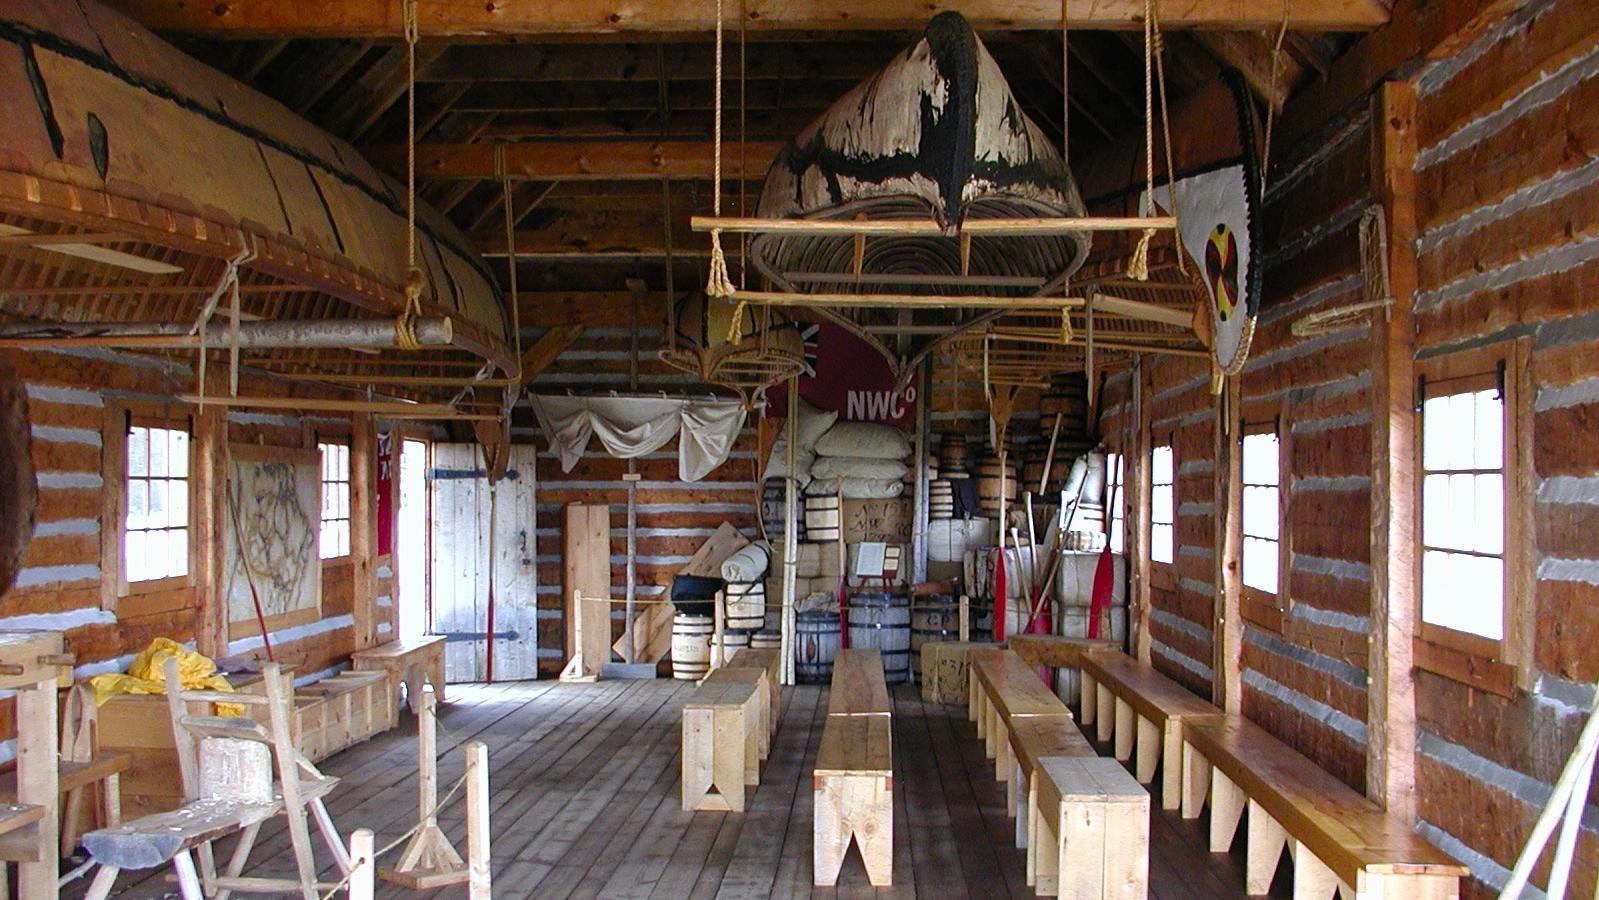 Inside of a historic wood building with rows of benches and canoes hanging from the rafters.